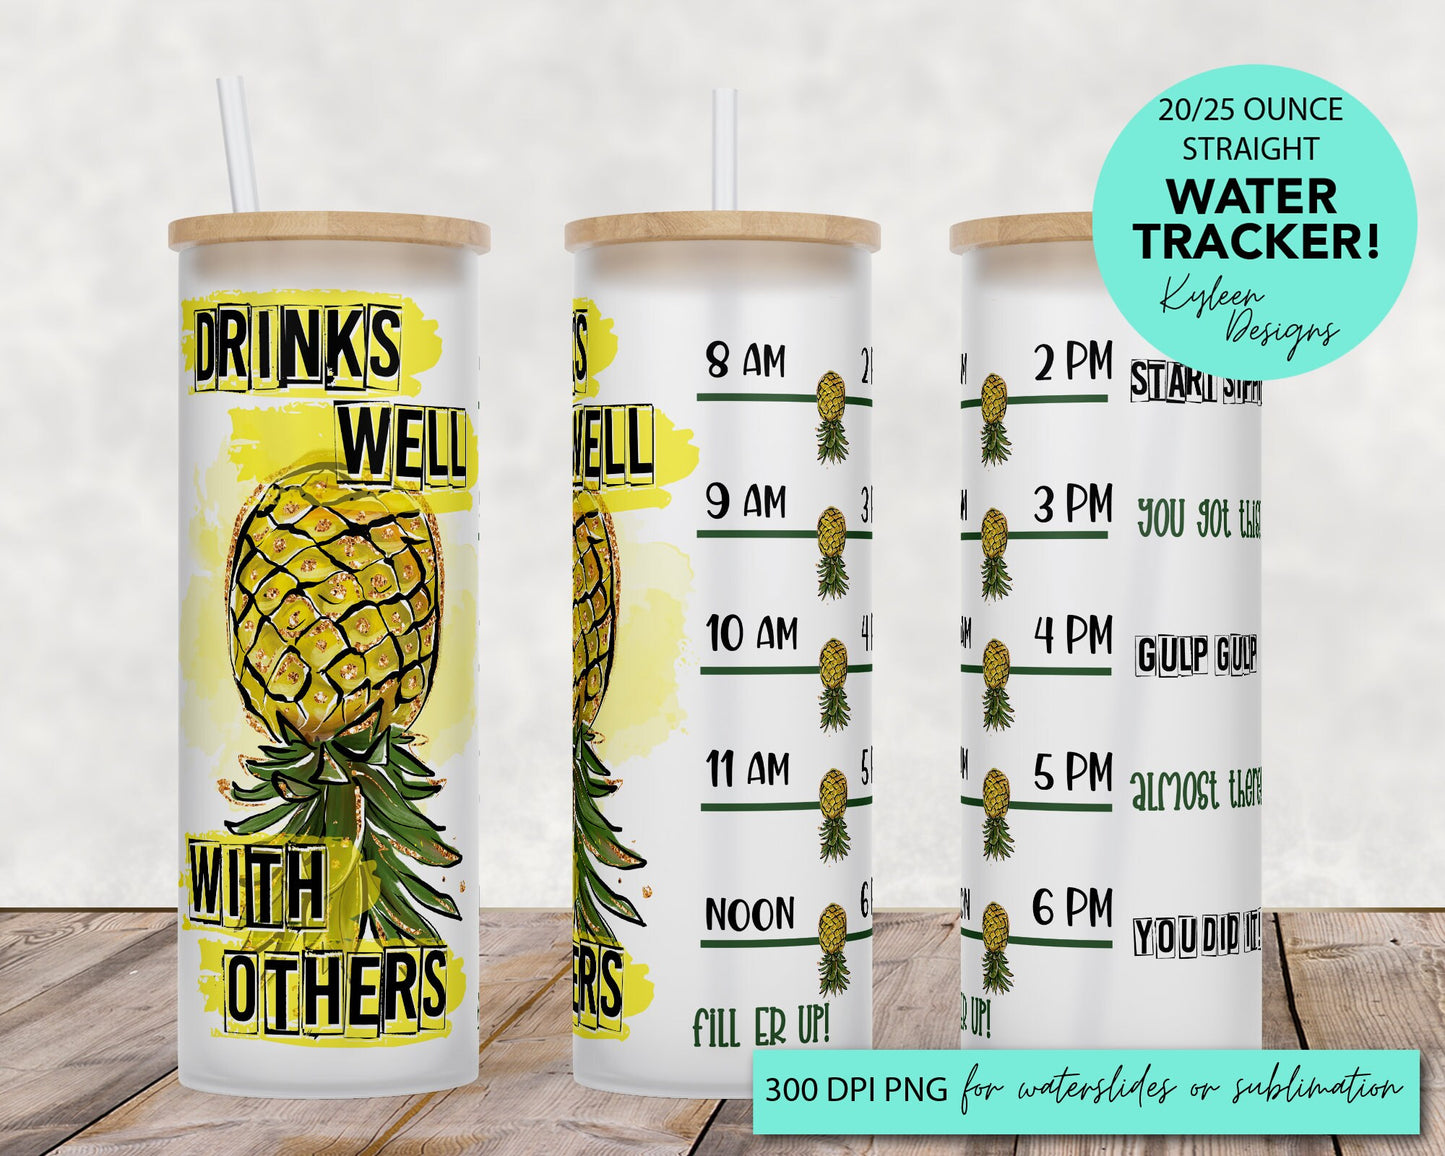 25 oz glass tumbler Drinks well with others pineapple Water tracker 20/25 ounce wrap for sublimation, waterslide High res PNG digital file